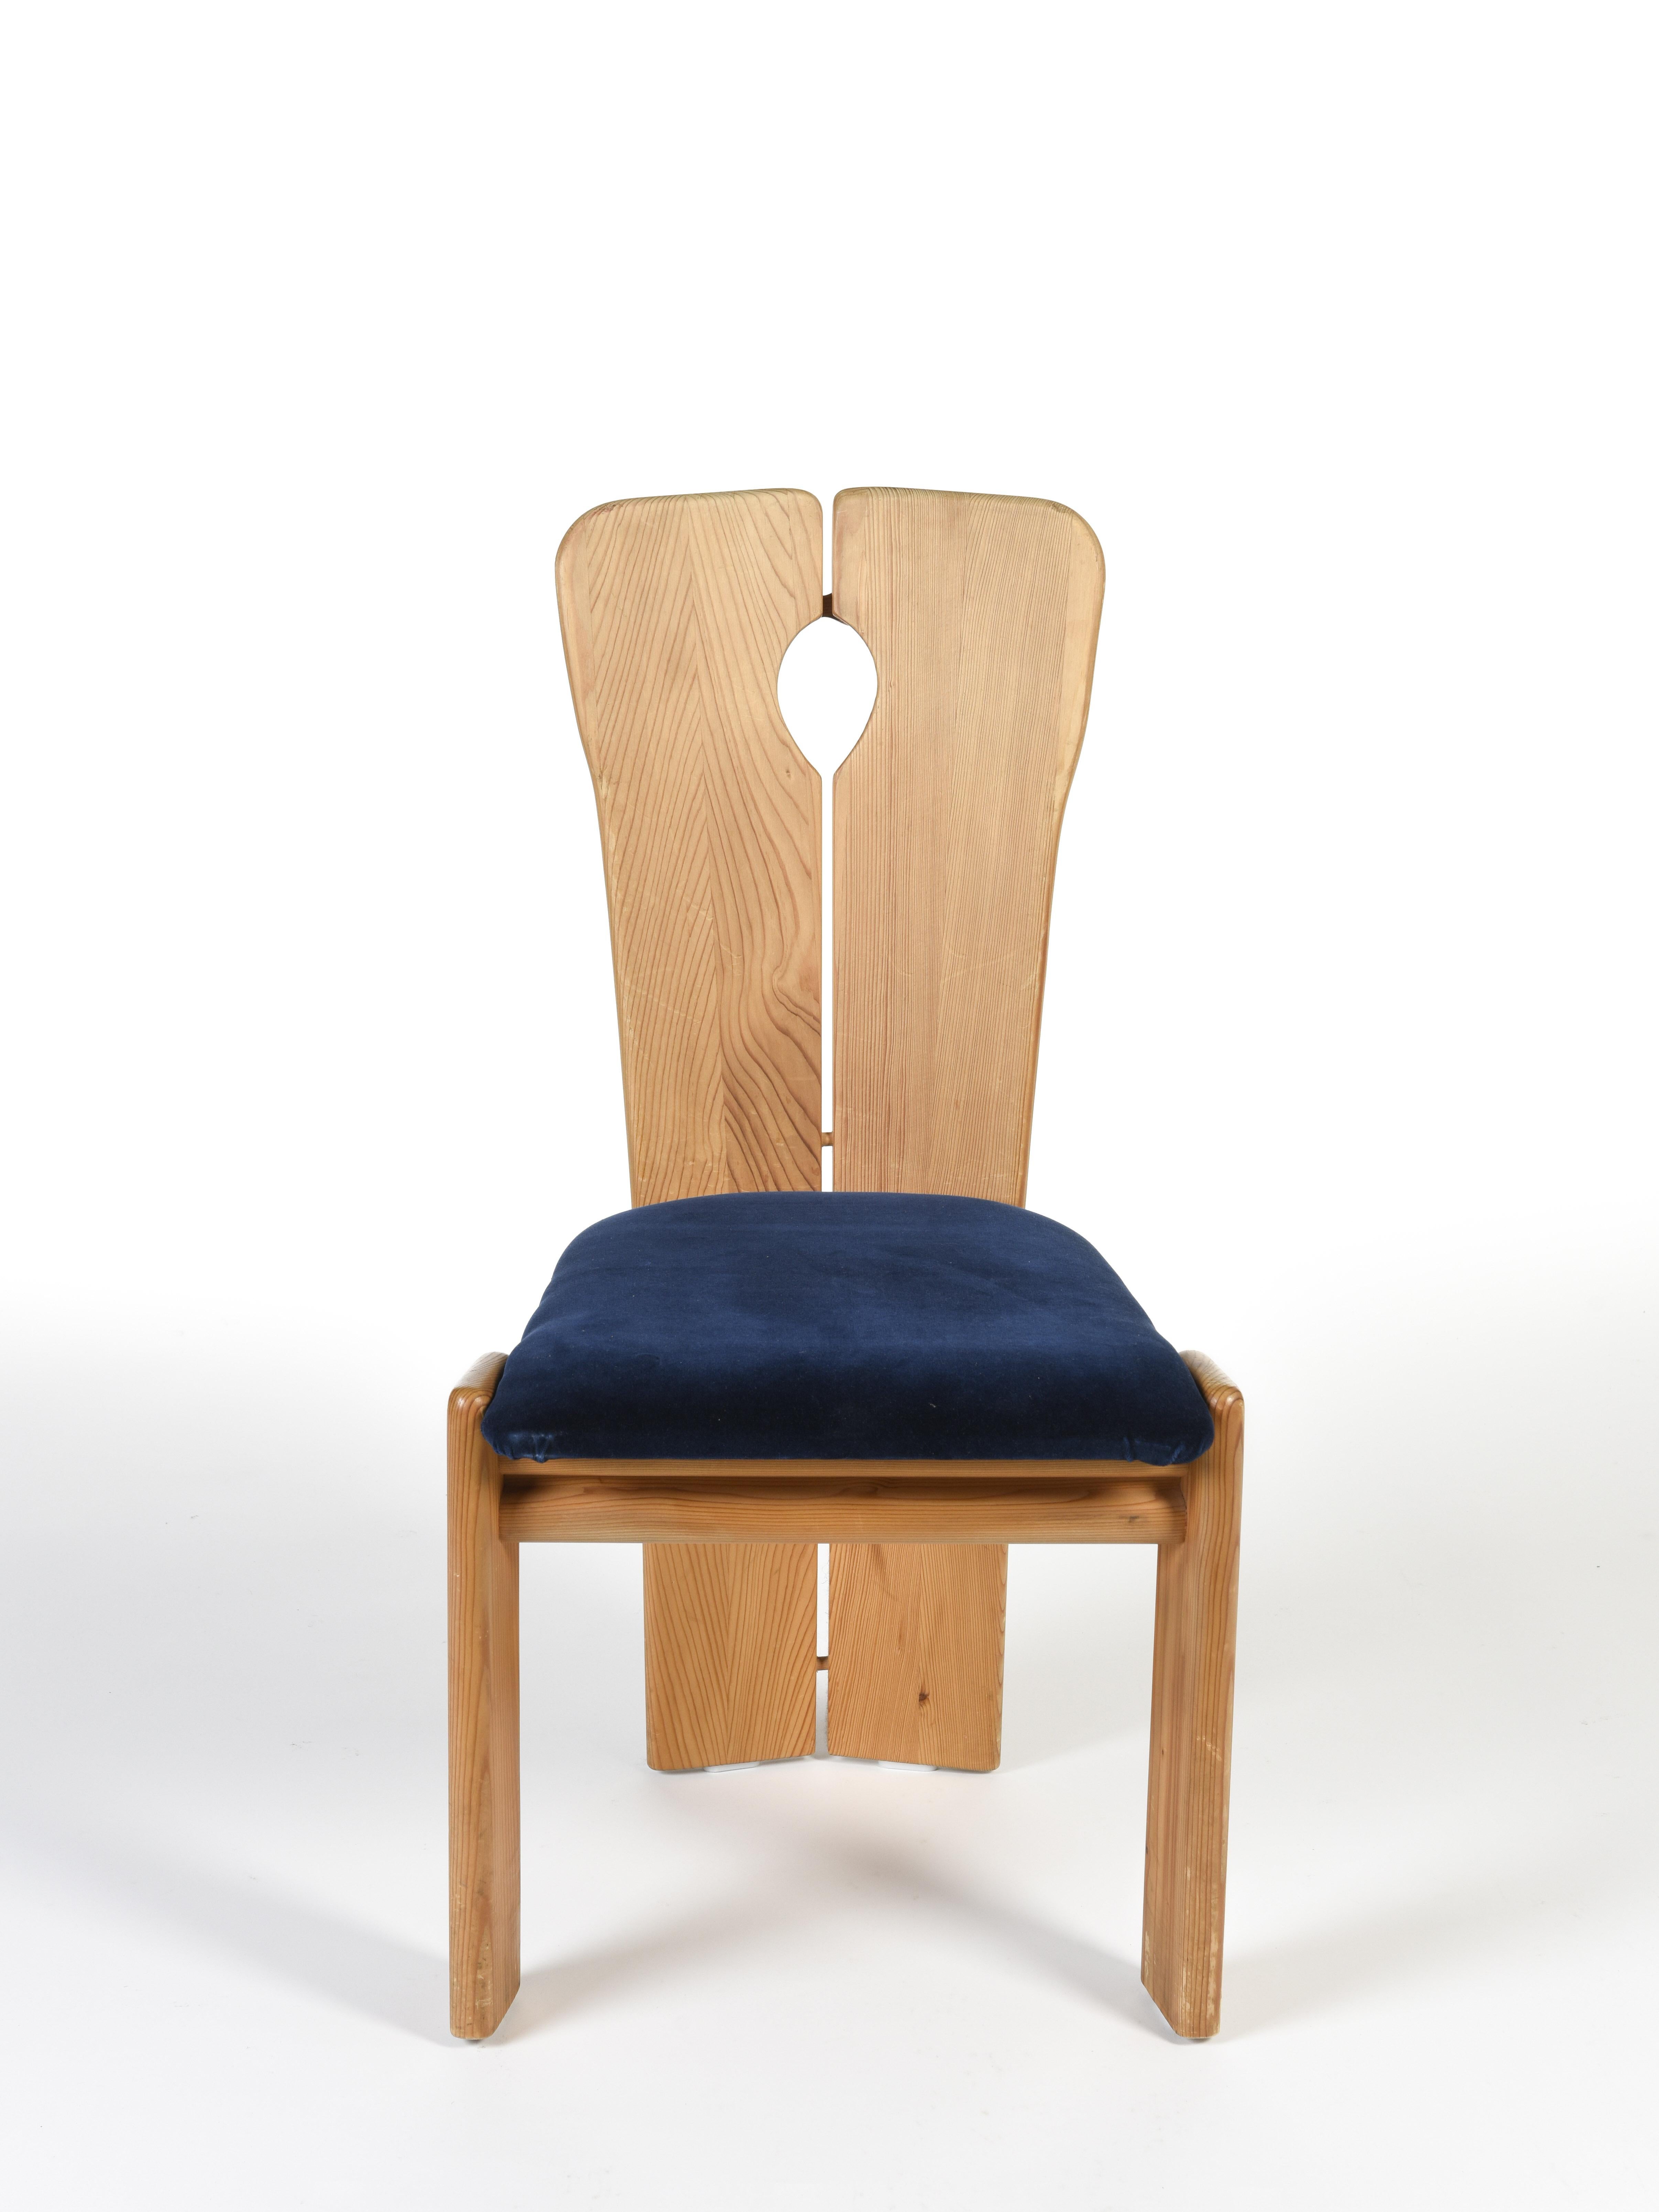 Made from solid pine wood assemblies. It is an elemental composition with every part being essential to its structure.

The seat of this wood framed tripod chair has been uphostered with a luminous blue velvet. 


Measures: H 90 cm, L 48 cm, P 50